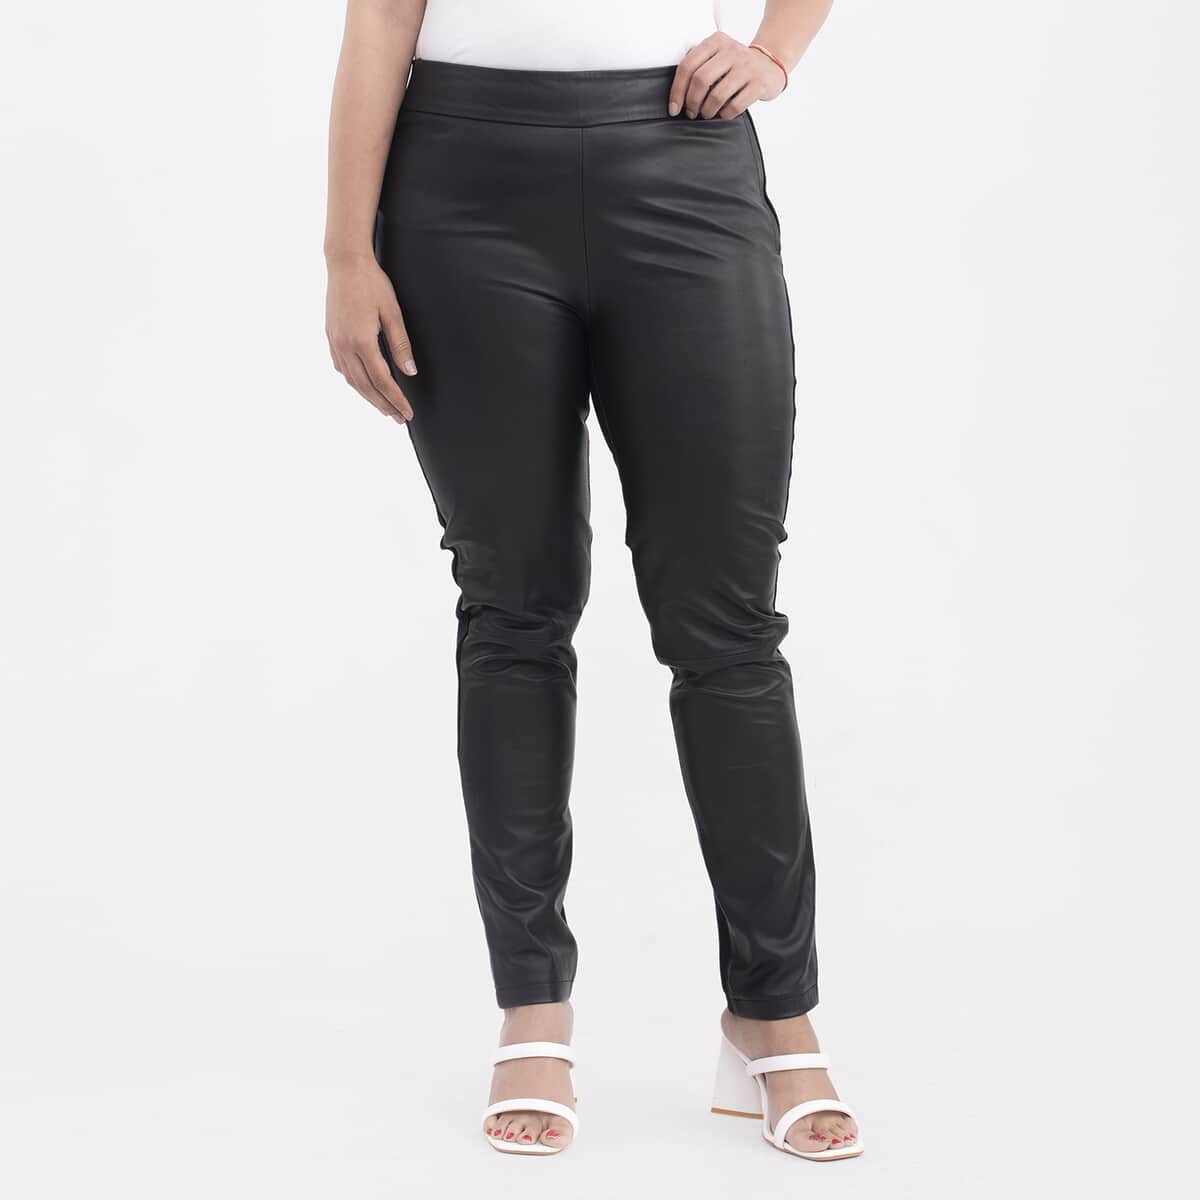 TAMSY Black Genuine Lamb Leather With Back Ponte Knit Legging - S image number 0